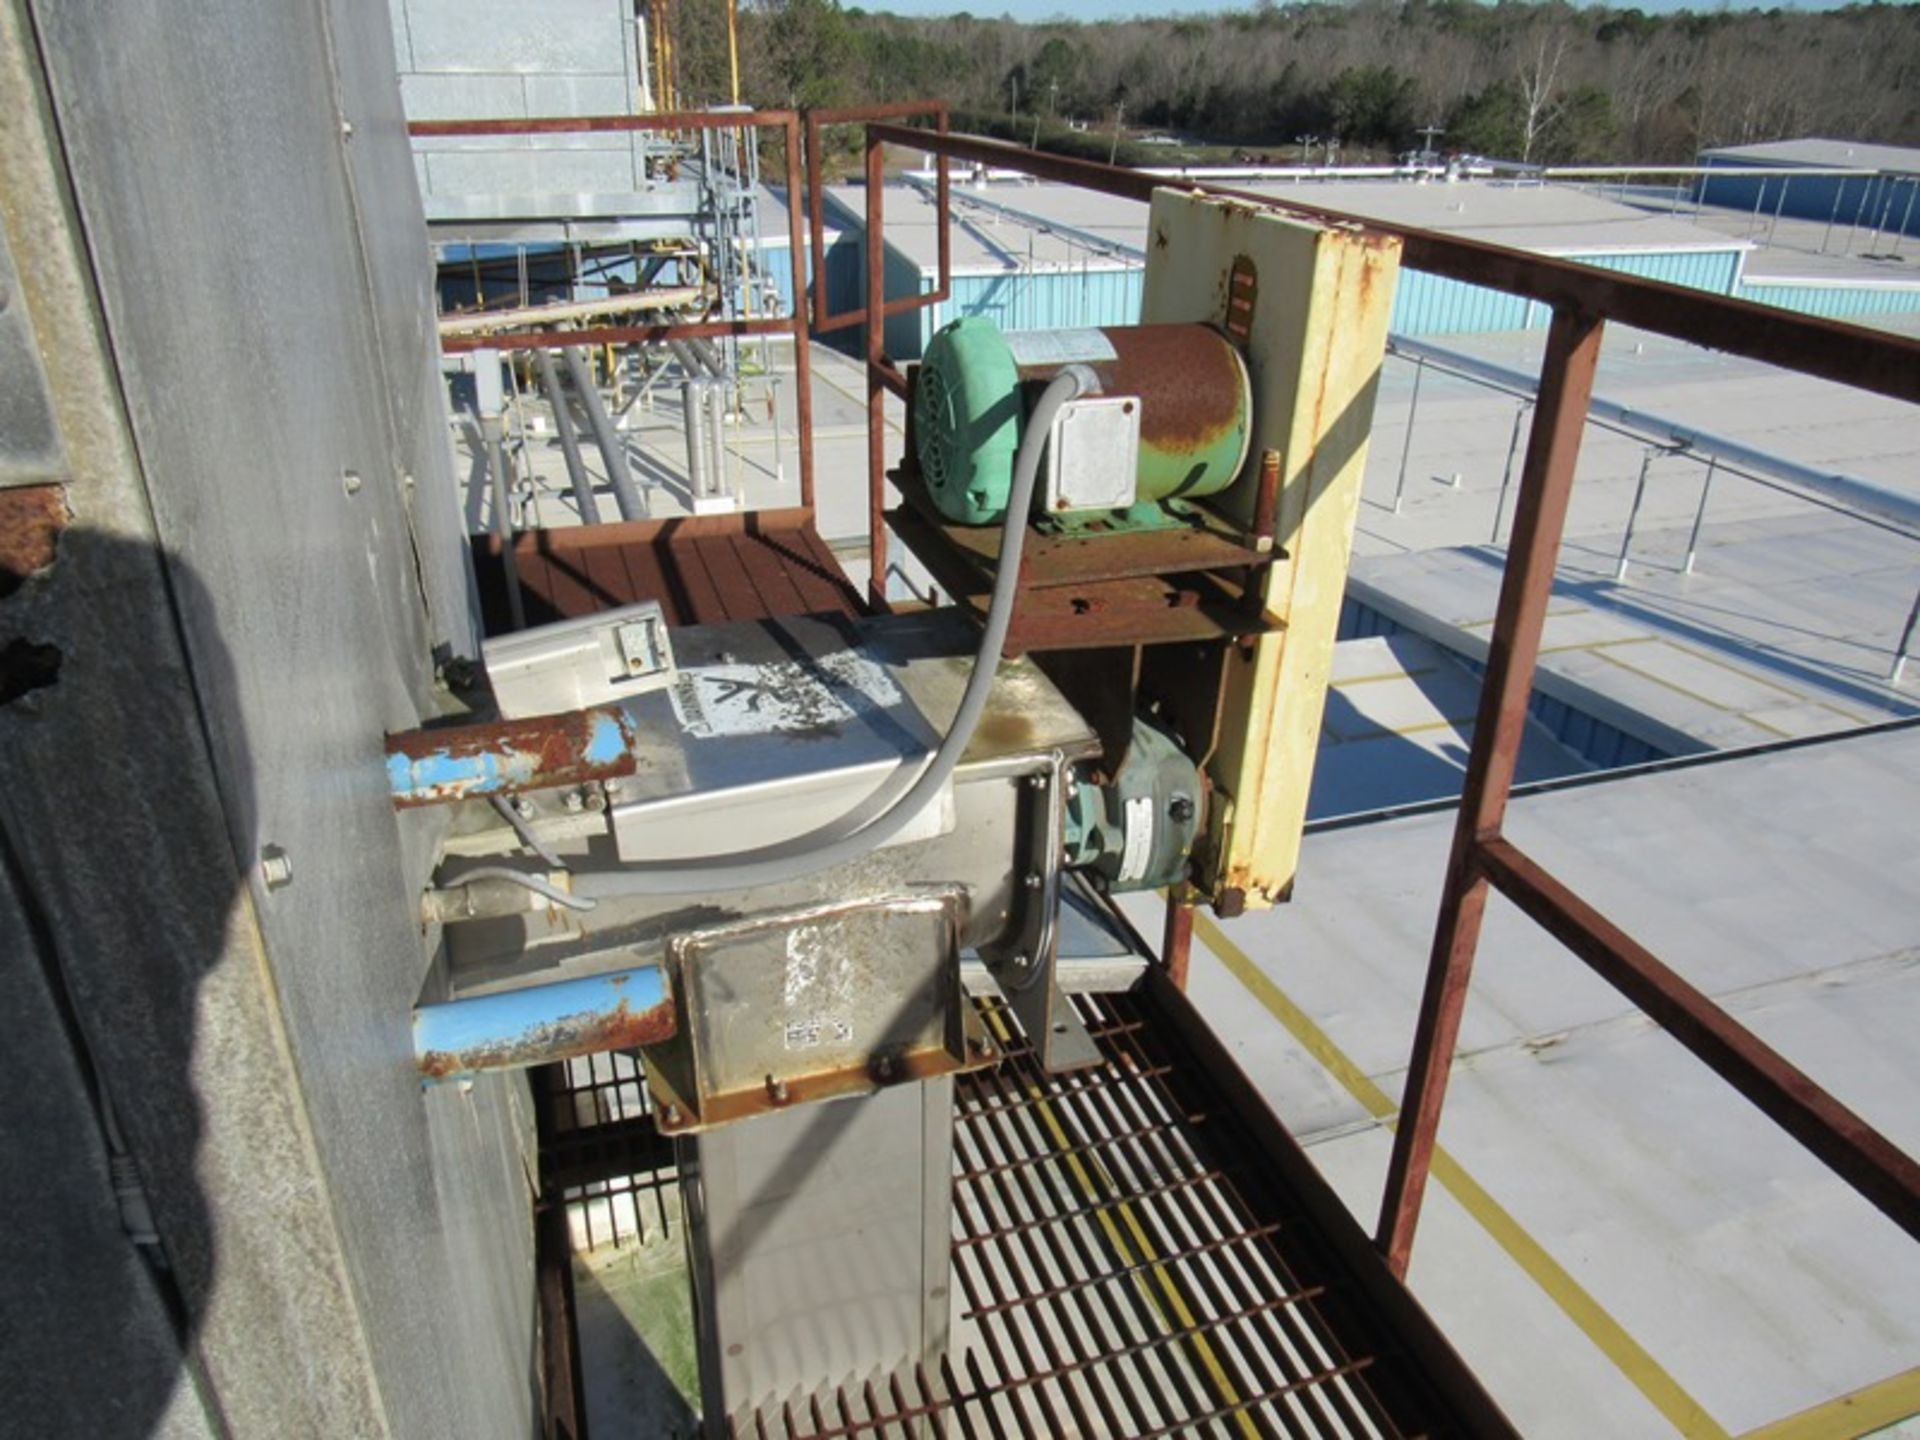 Turbo Mdl. Tigar 36-20 Ammonia Plate Chiller, Ser. #E022030, on roof top structure, 21 plates in - Image 5 of 9